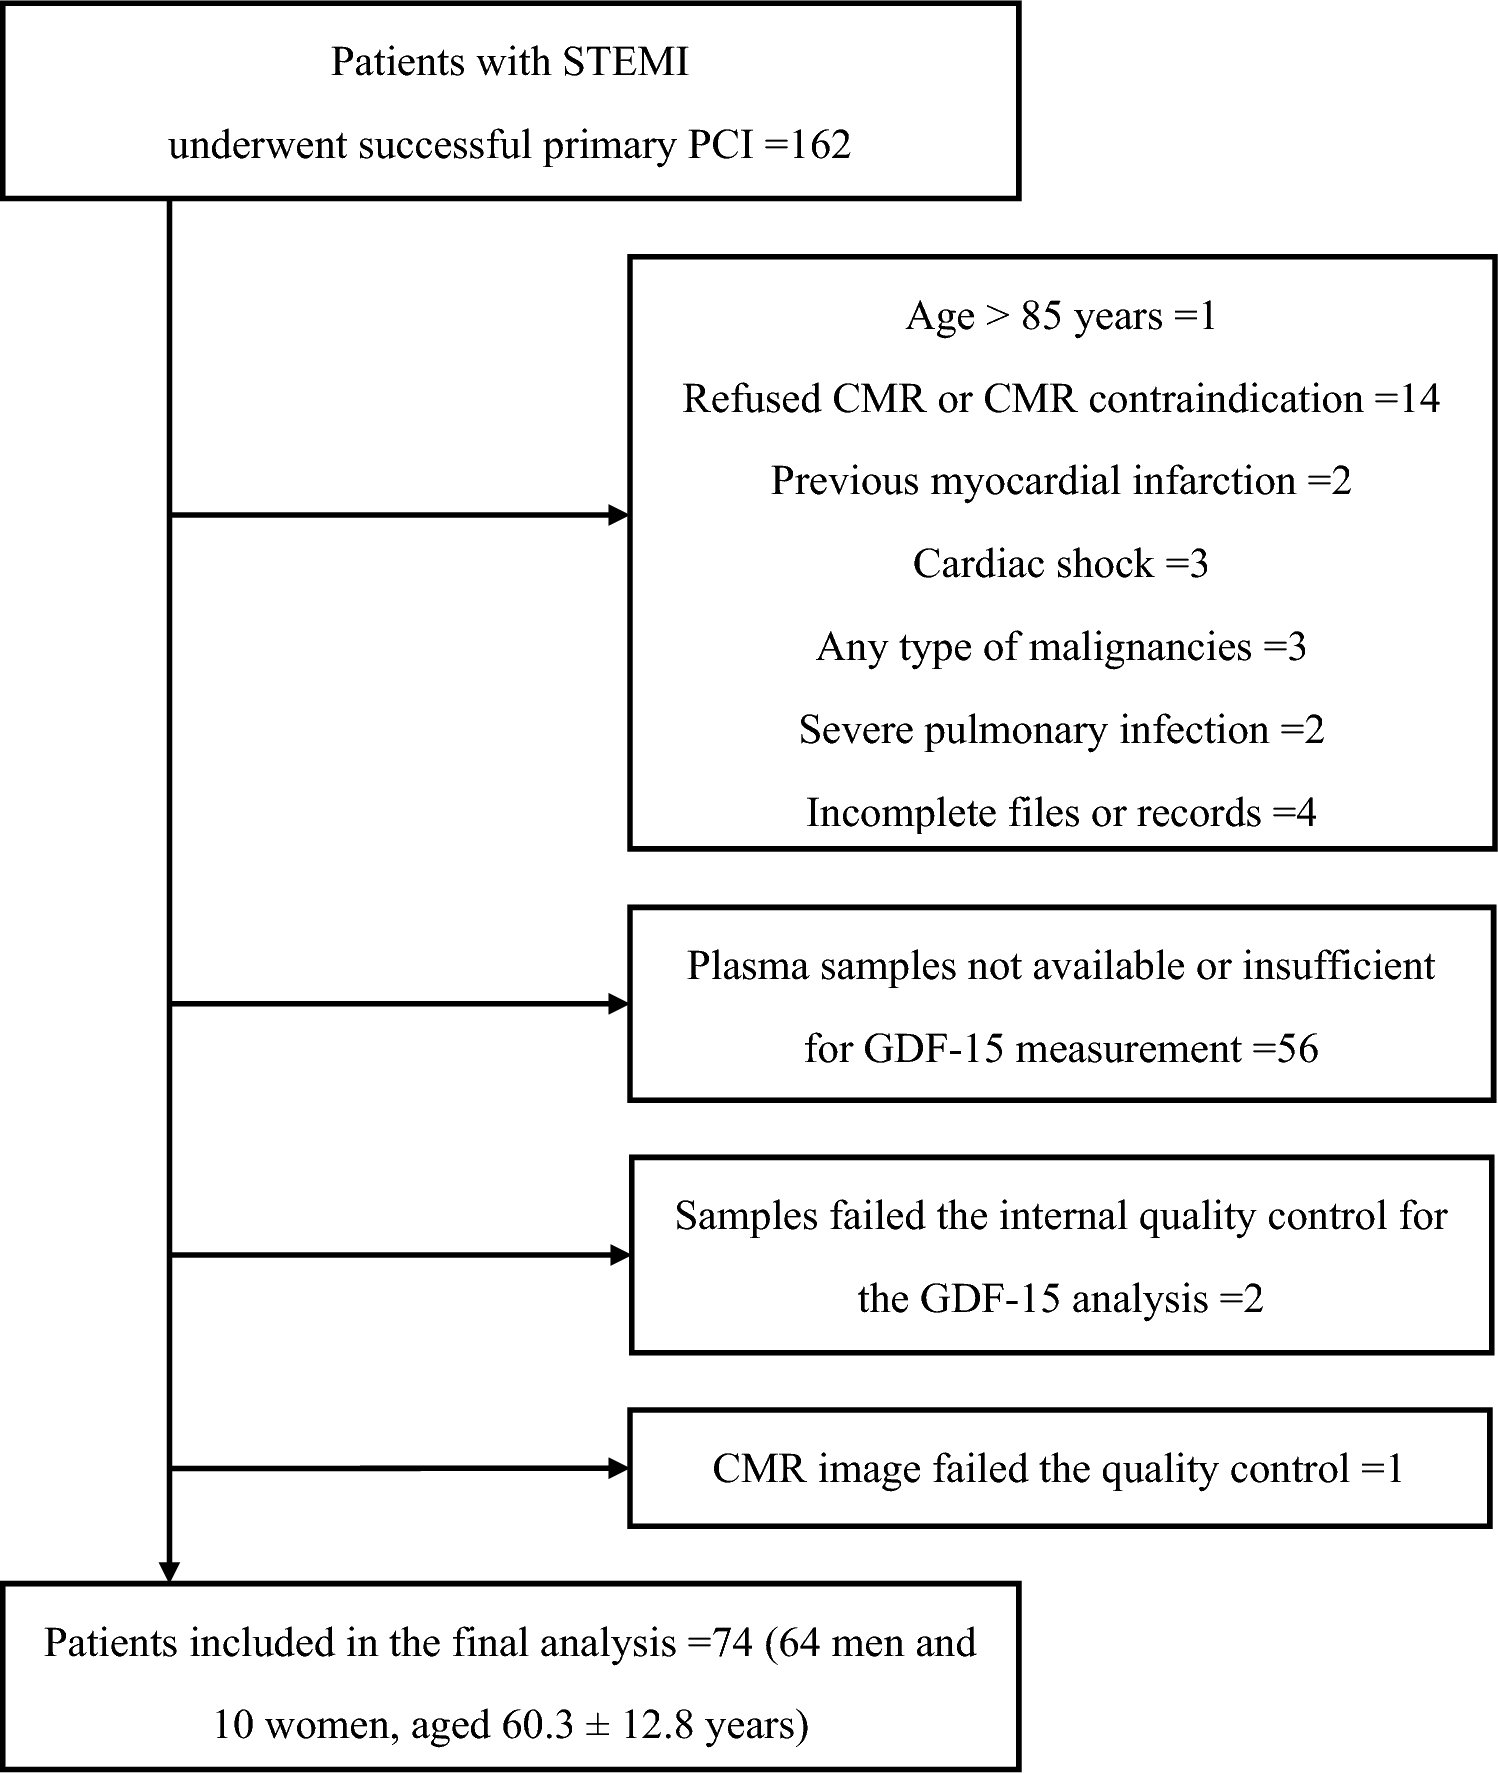 Growth differentiation factor-15 as a negative predictor for microvascular obstruction in ST-segment elevation myocardial infarction after primary percutaneous coronary intervention